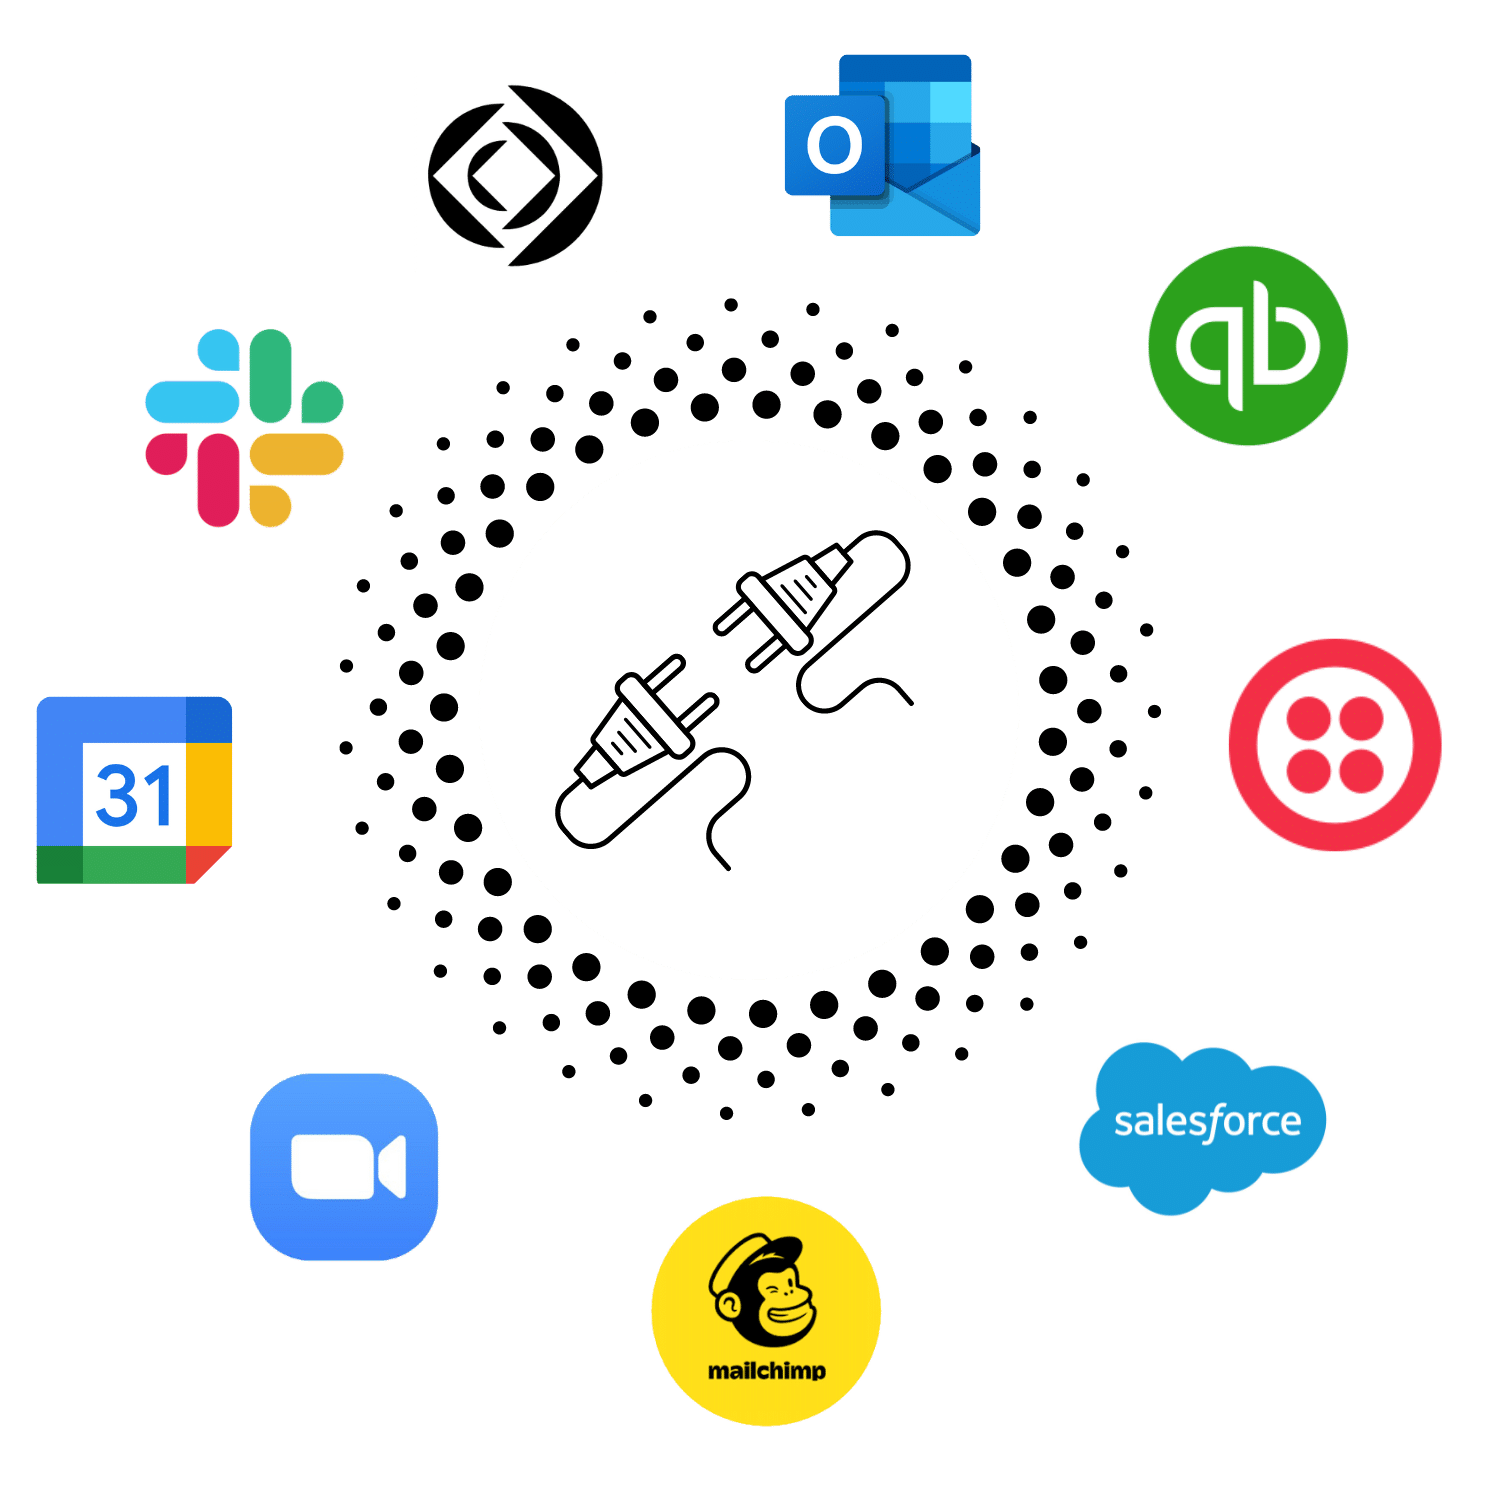 Graphic of various web application icons such as Salesforce, Twilio, Slack, Mailchimp, and Zoom surrounding a plug, symbolizing FileMaker&apos;s integration capabilities with the web.